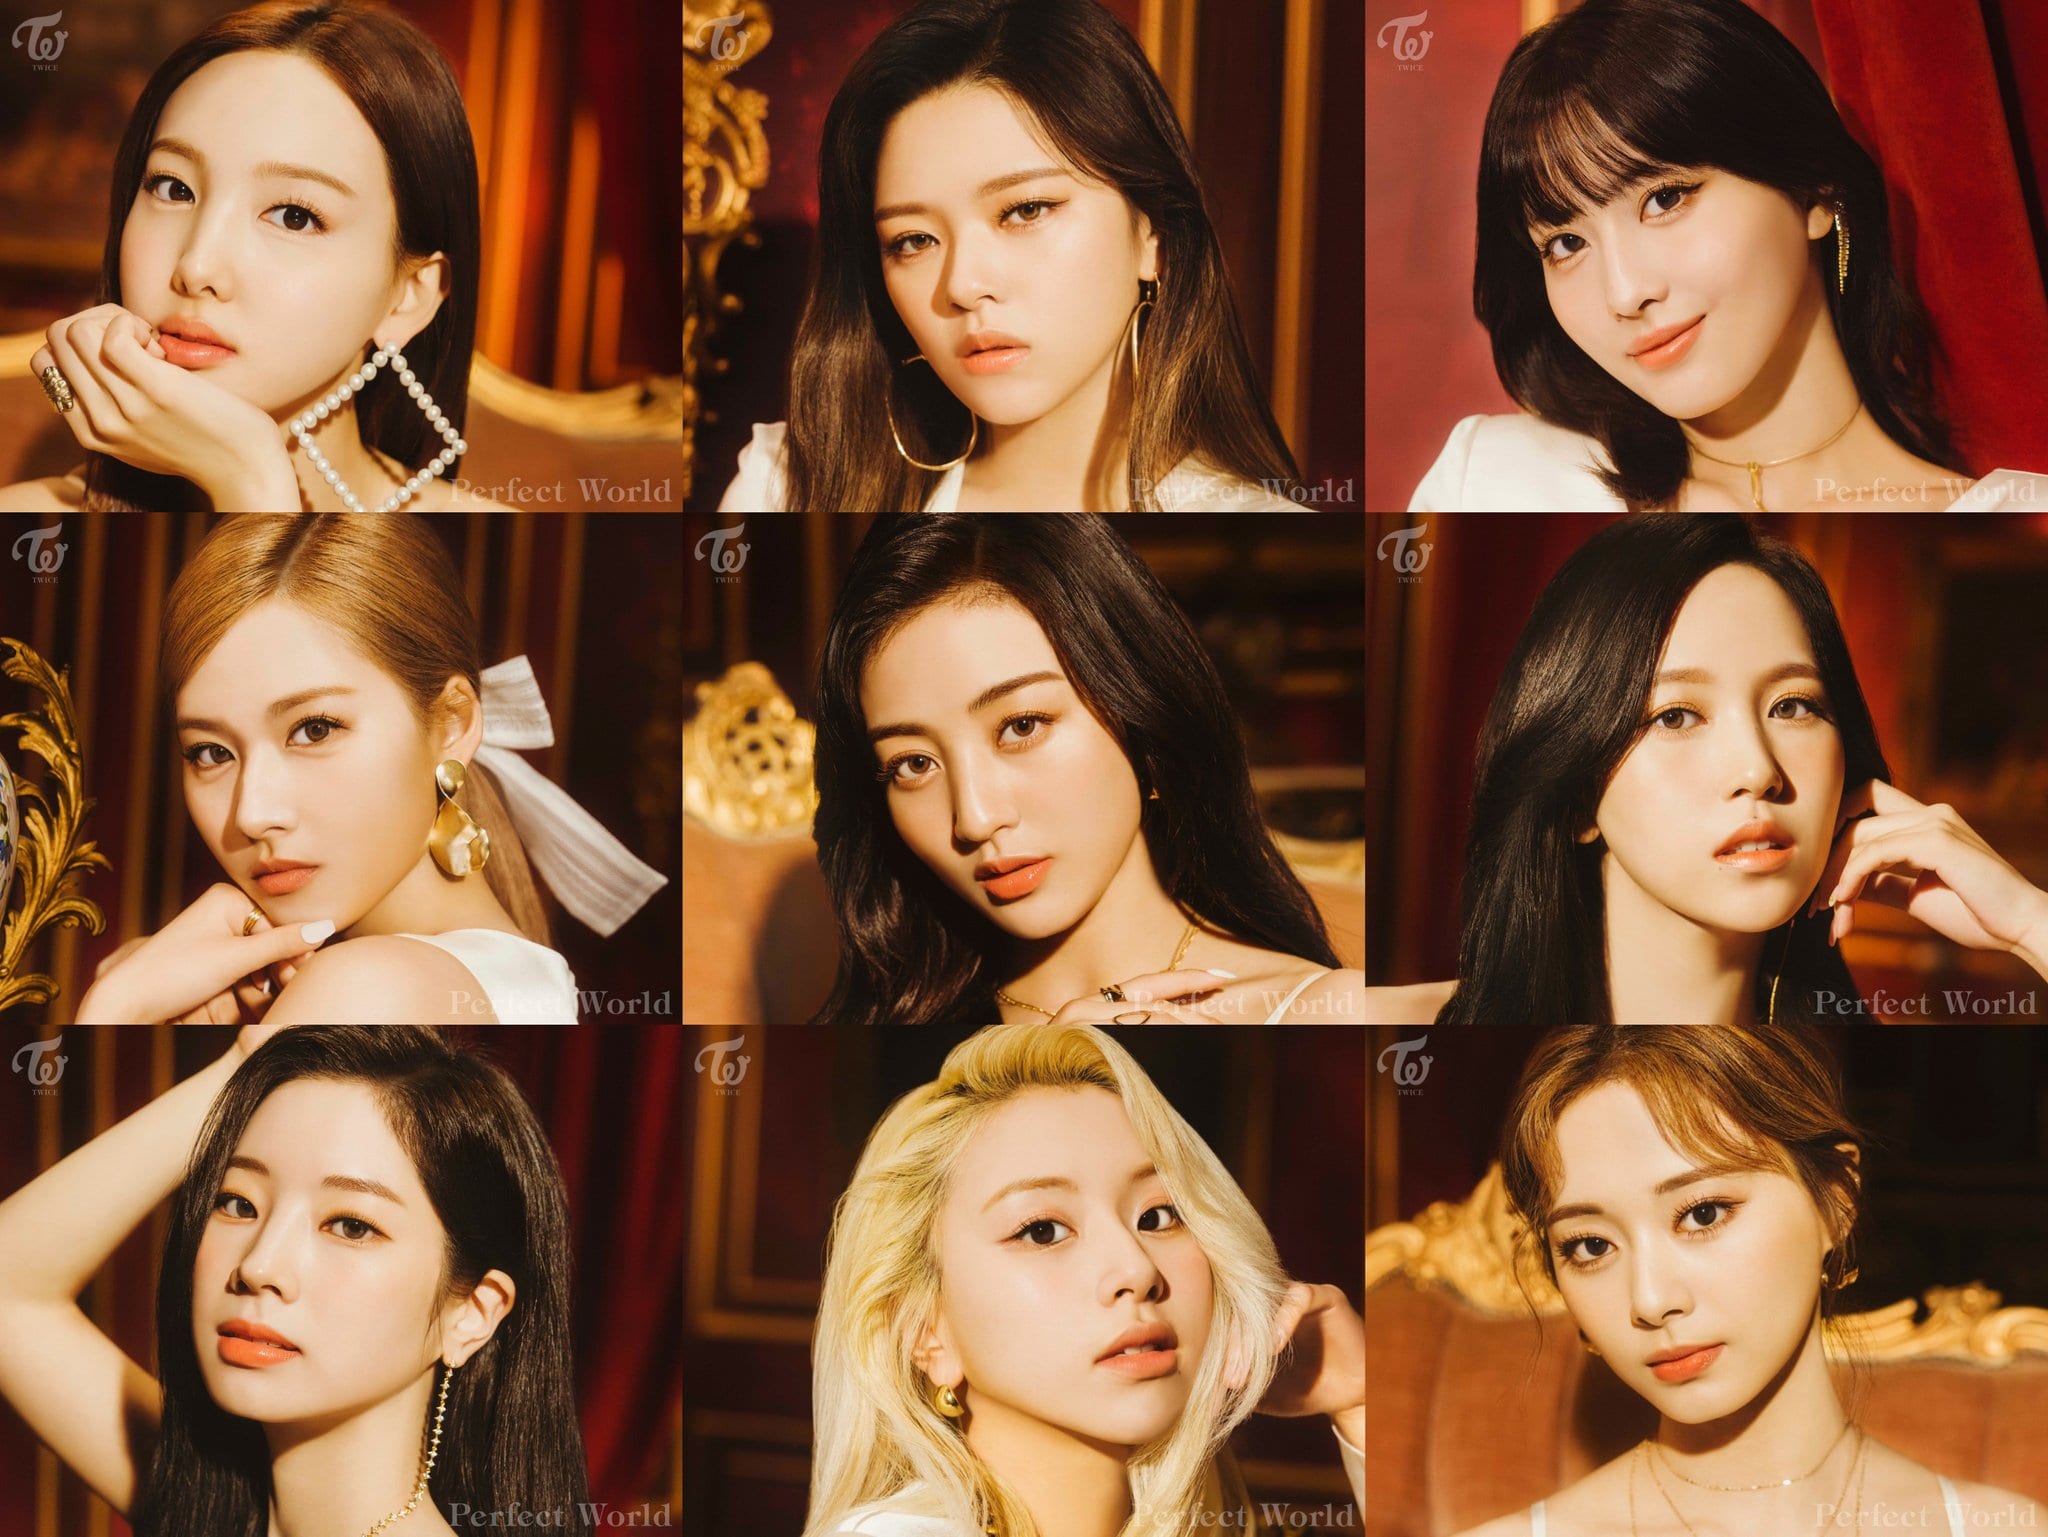 Just have finished promoting, TWICE hastily released the next comeback teaser: How long is JYP going to exploit idols?